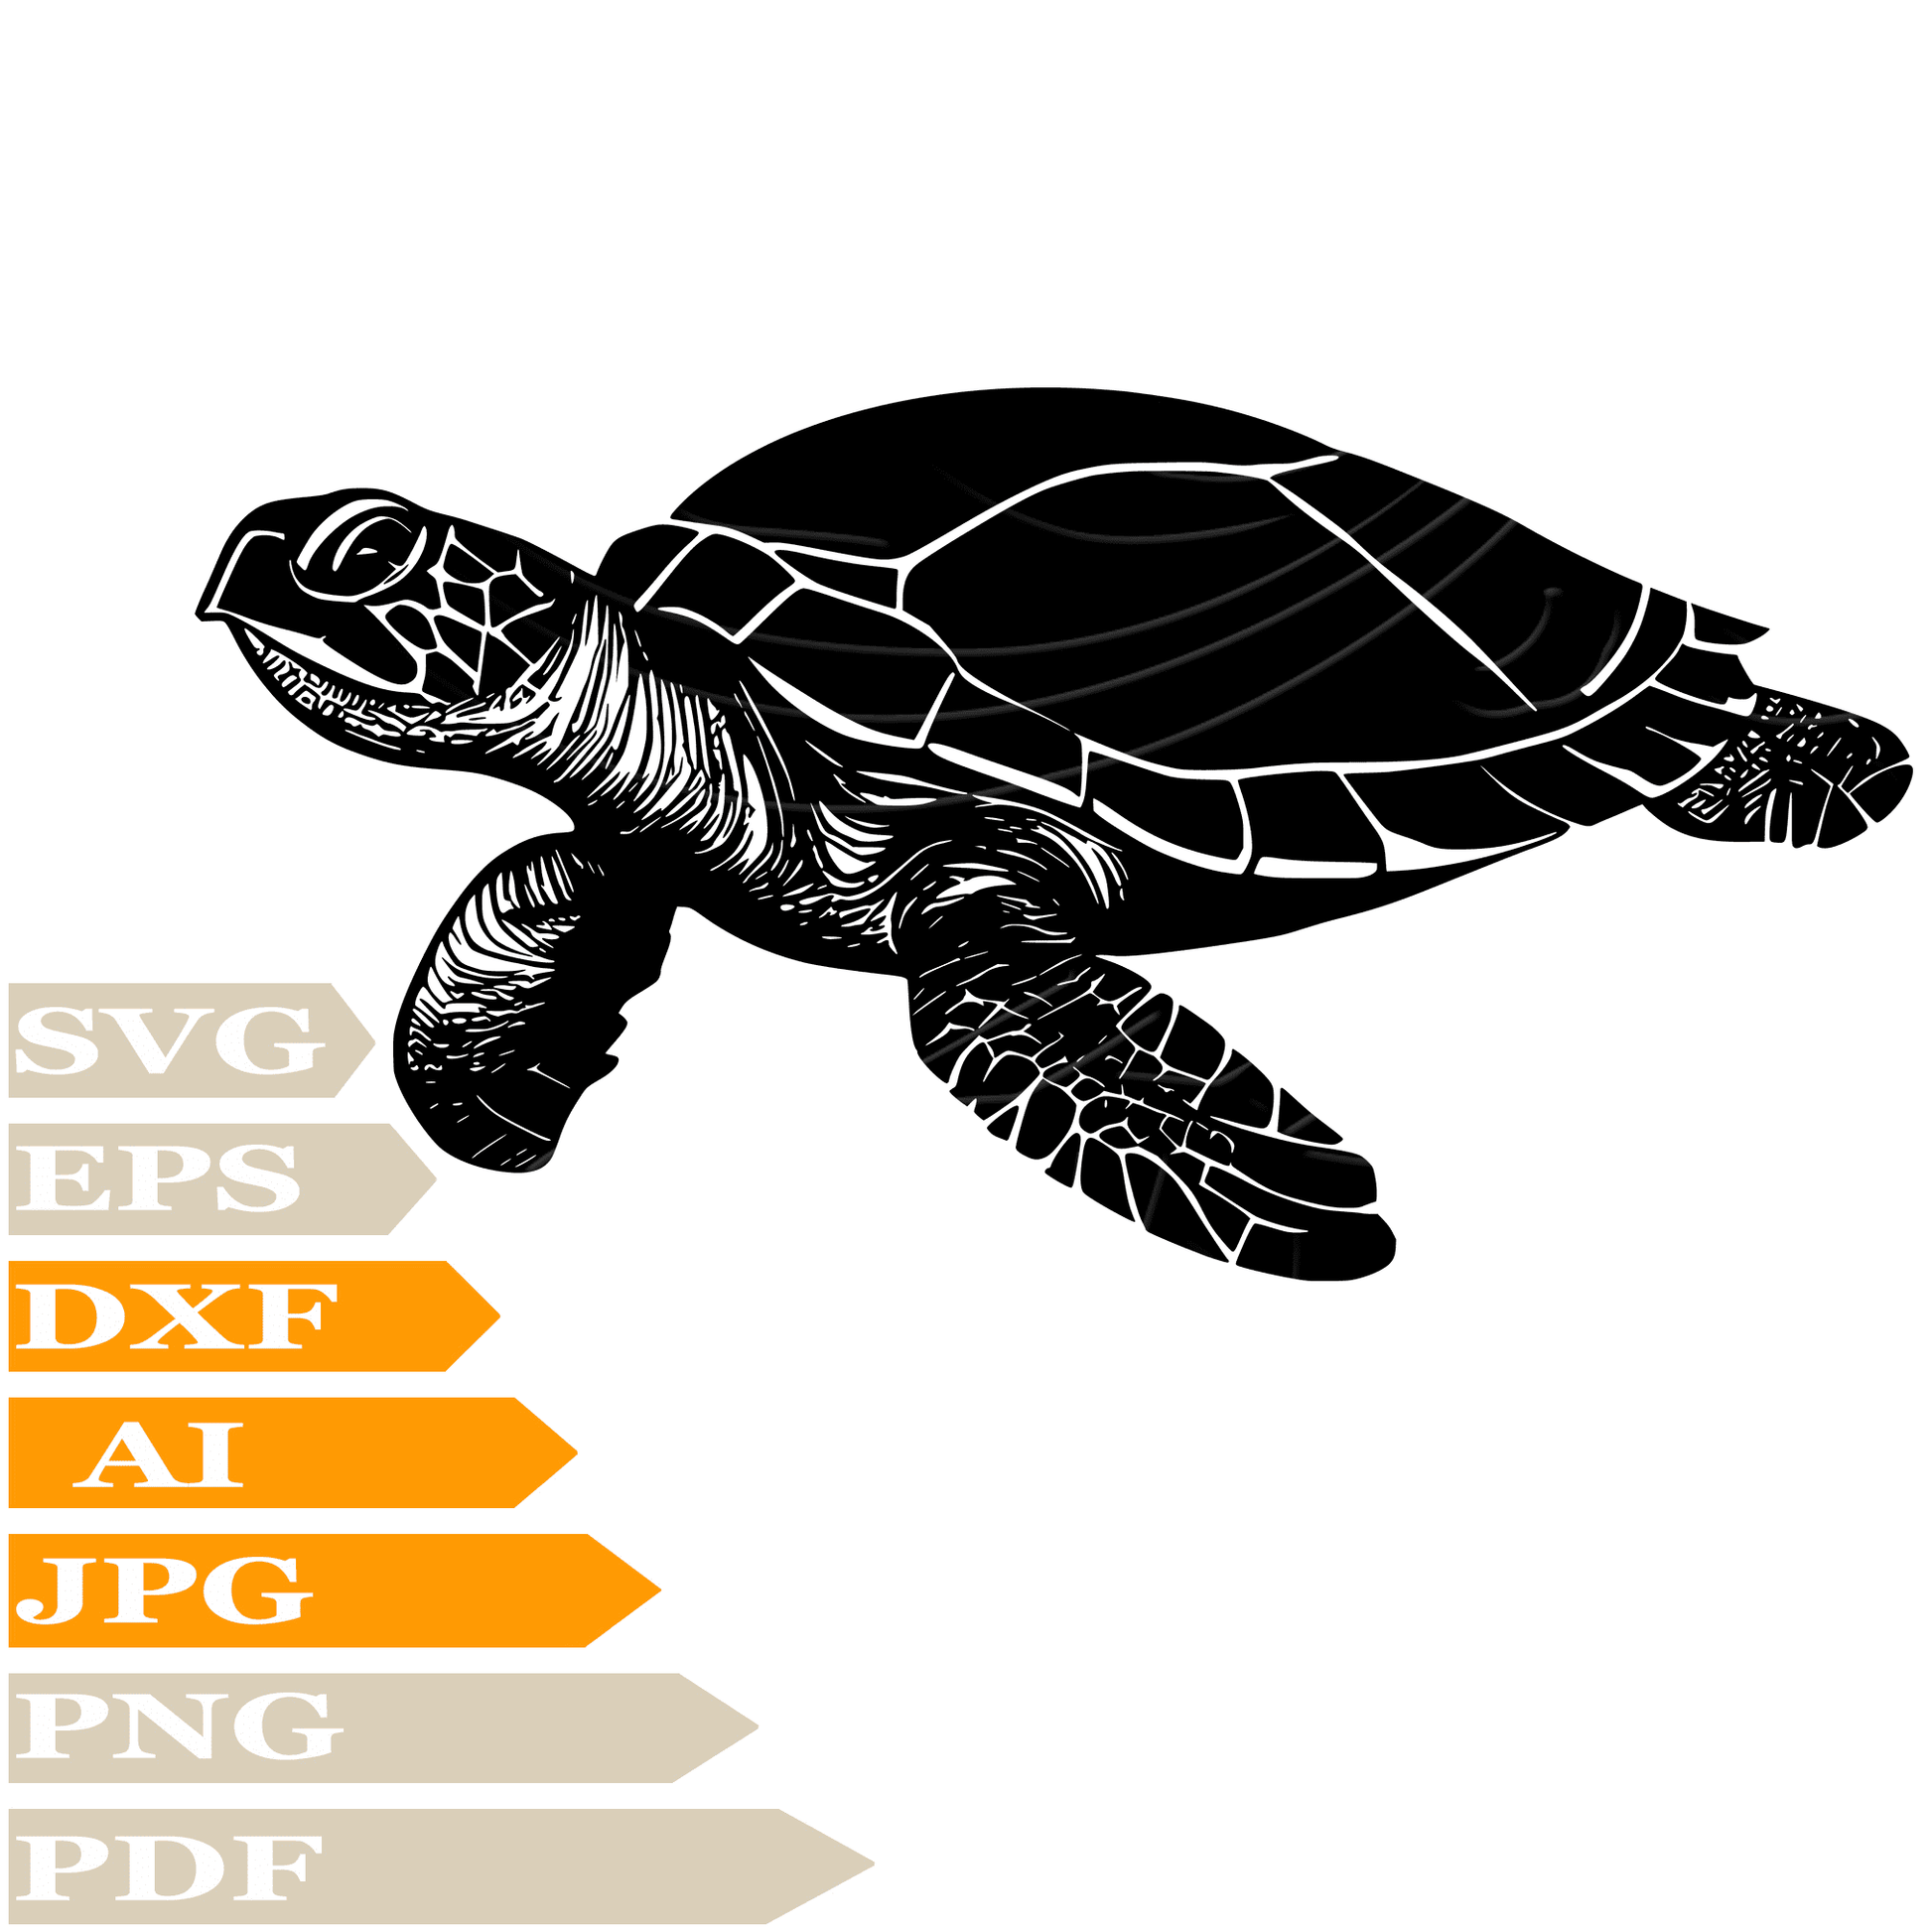 Turtle SVG-Sea Turtle Personalized SVG-Sea Turtle Drawing SVG-Sea Turtle Reptilia Vector ClipArt's-SVG Cut Files-Illustration-PNG-Decal-Circuit-Digital Files-For Shirts-Silhouette